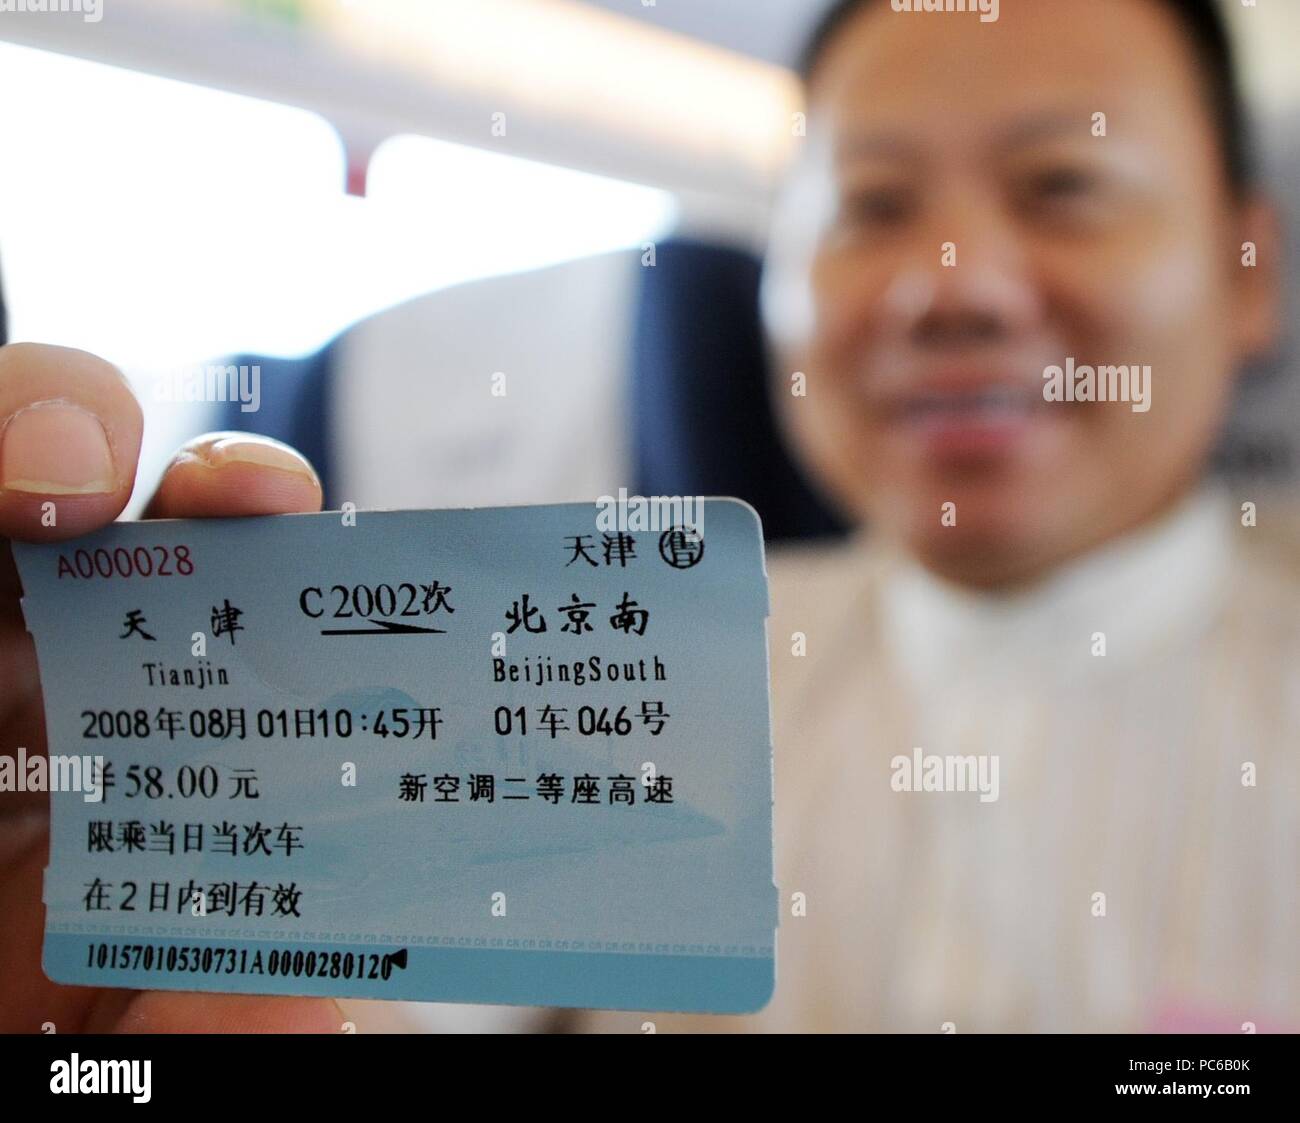 Beijing, China. 1st Aug, 2008. A passenger shows a train ticket for the Beijing-Tianjin high-speed intercity train in north China's Tianjin Municipality, Aug. 1, 2008. Credit: Wang Yebiao/Xinhua/Alamy Live News Stock Photo